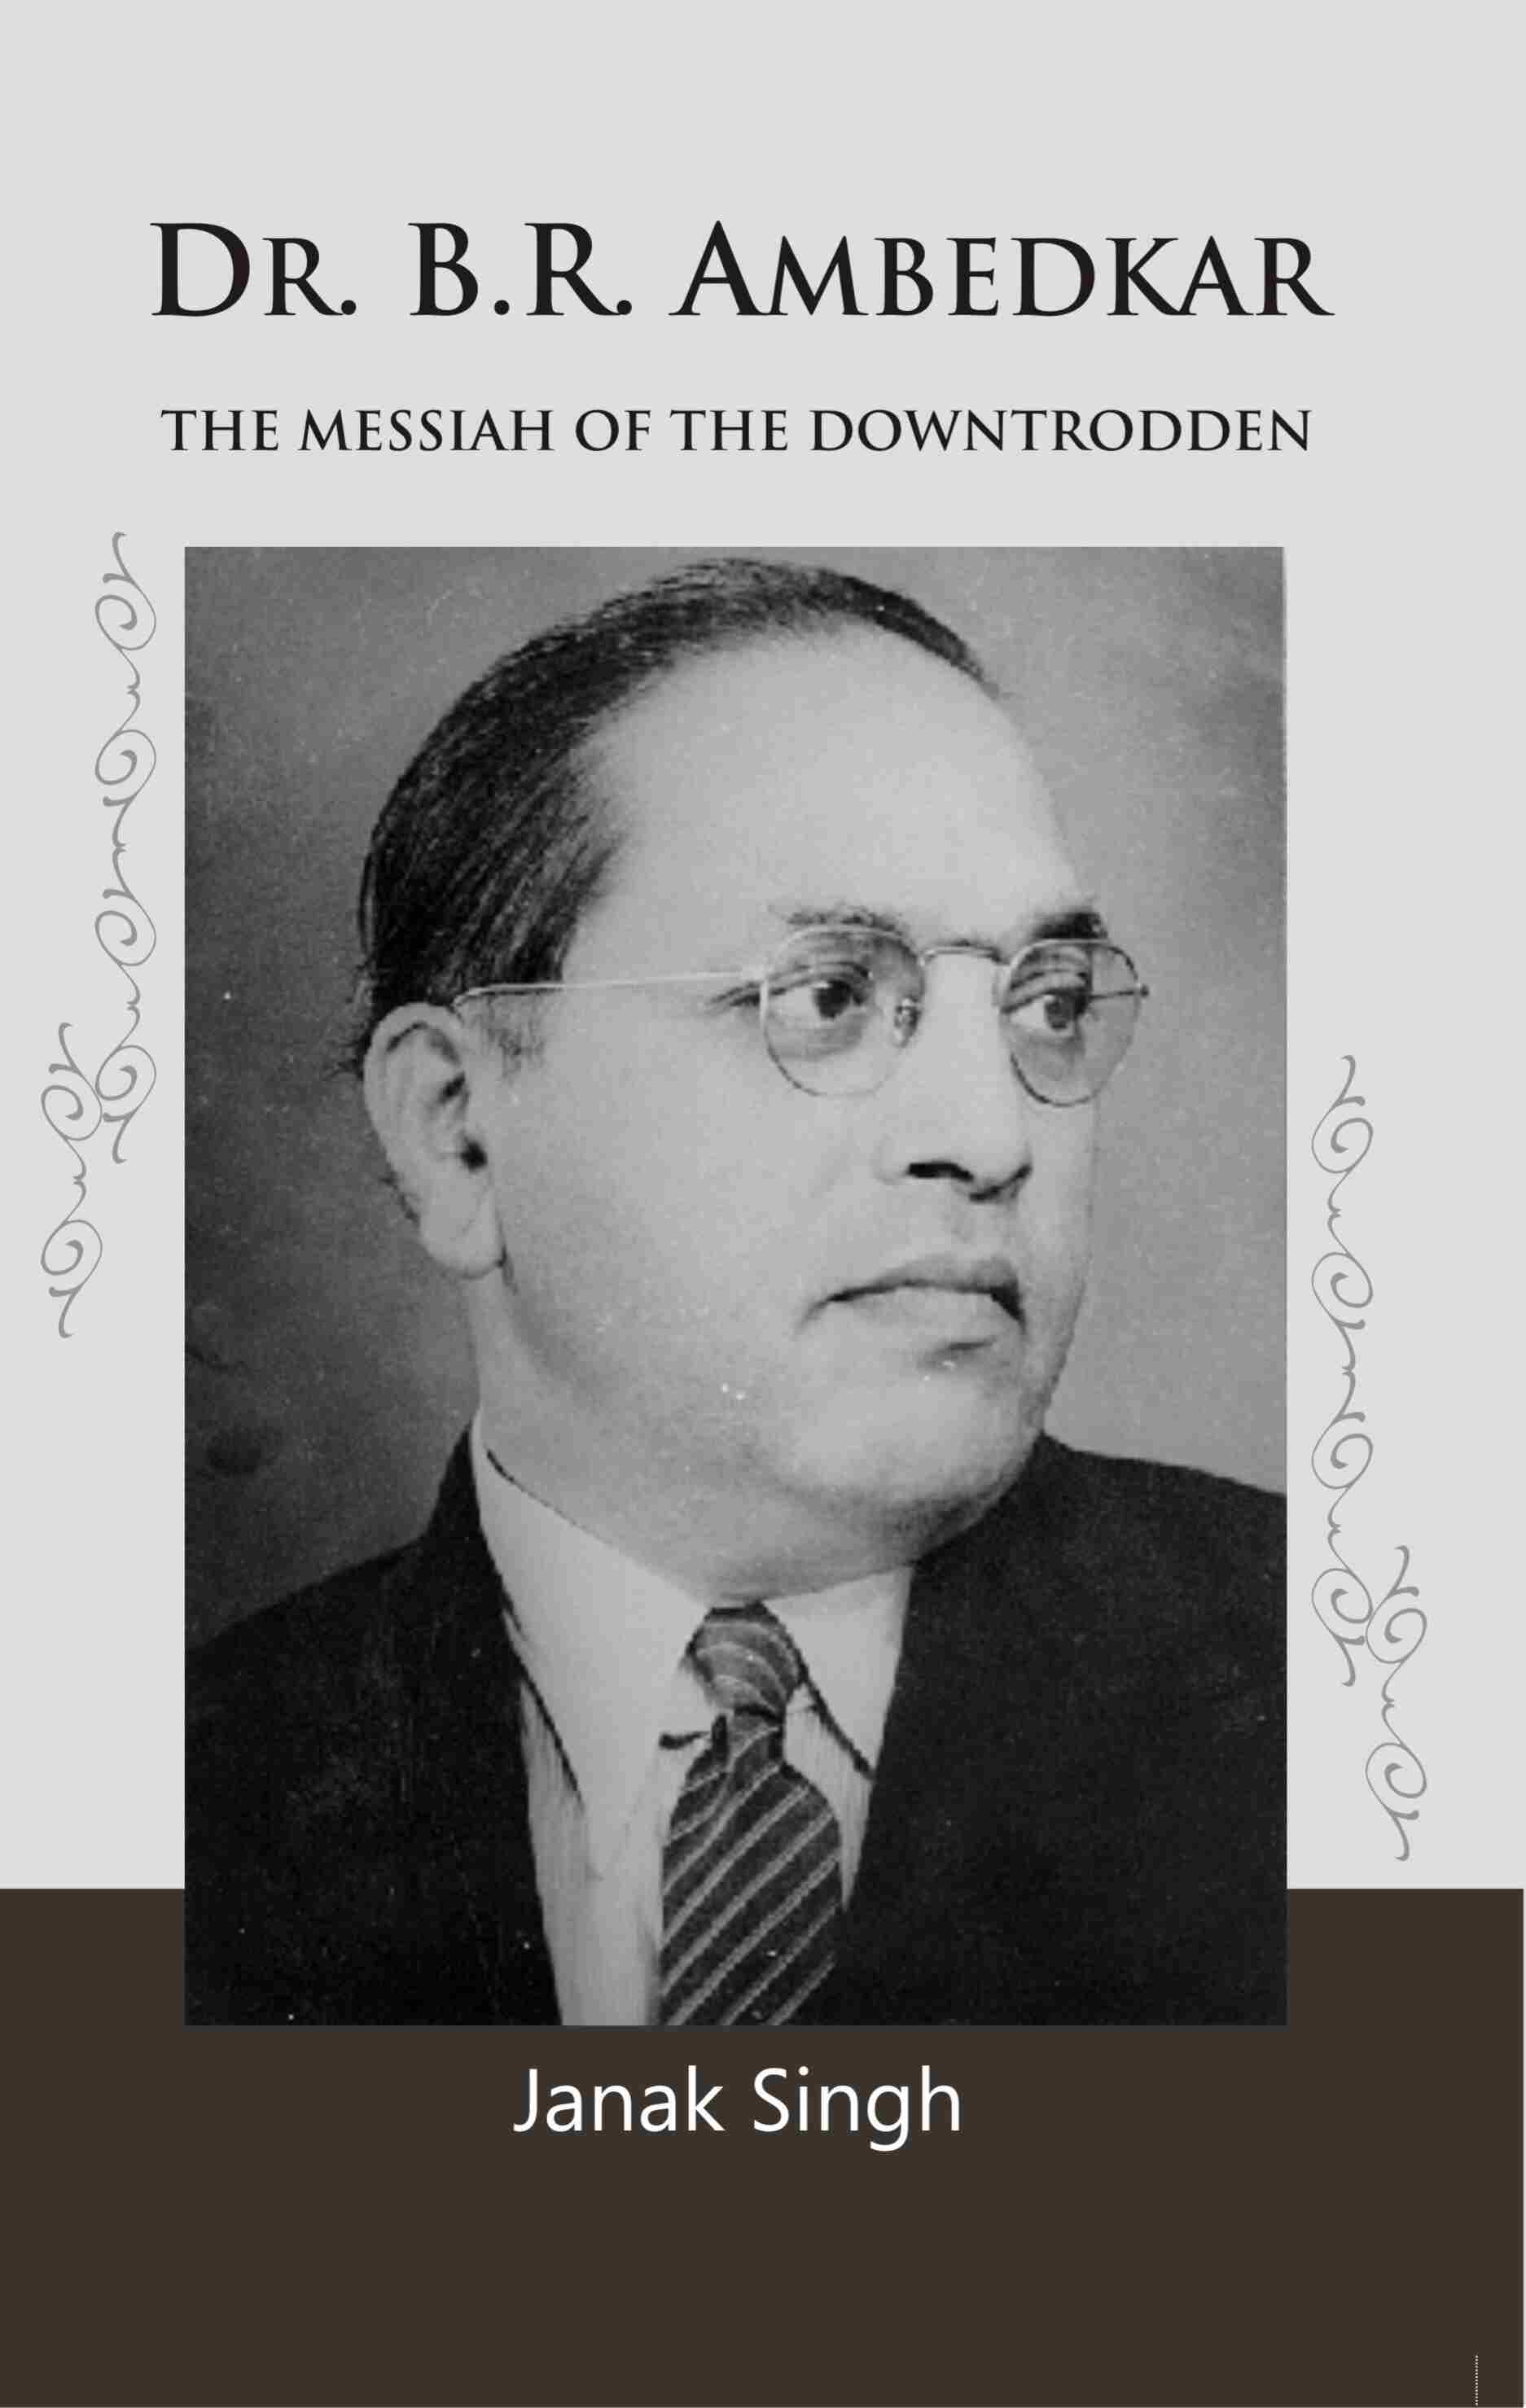 Dr. B.R. Ambedkar: the Messiah of the Downtrodden